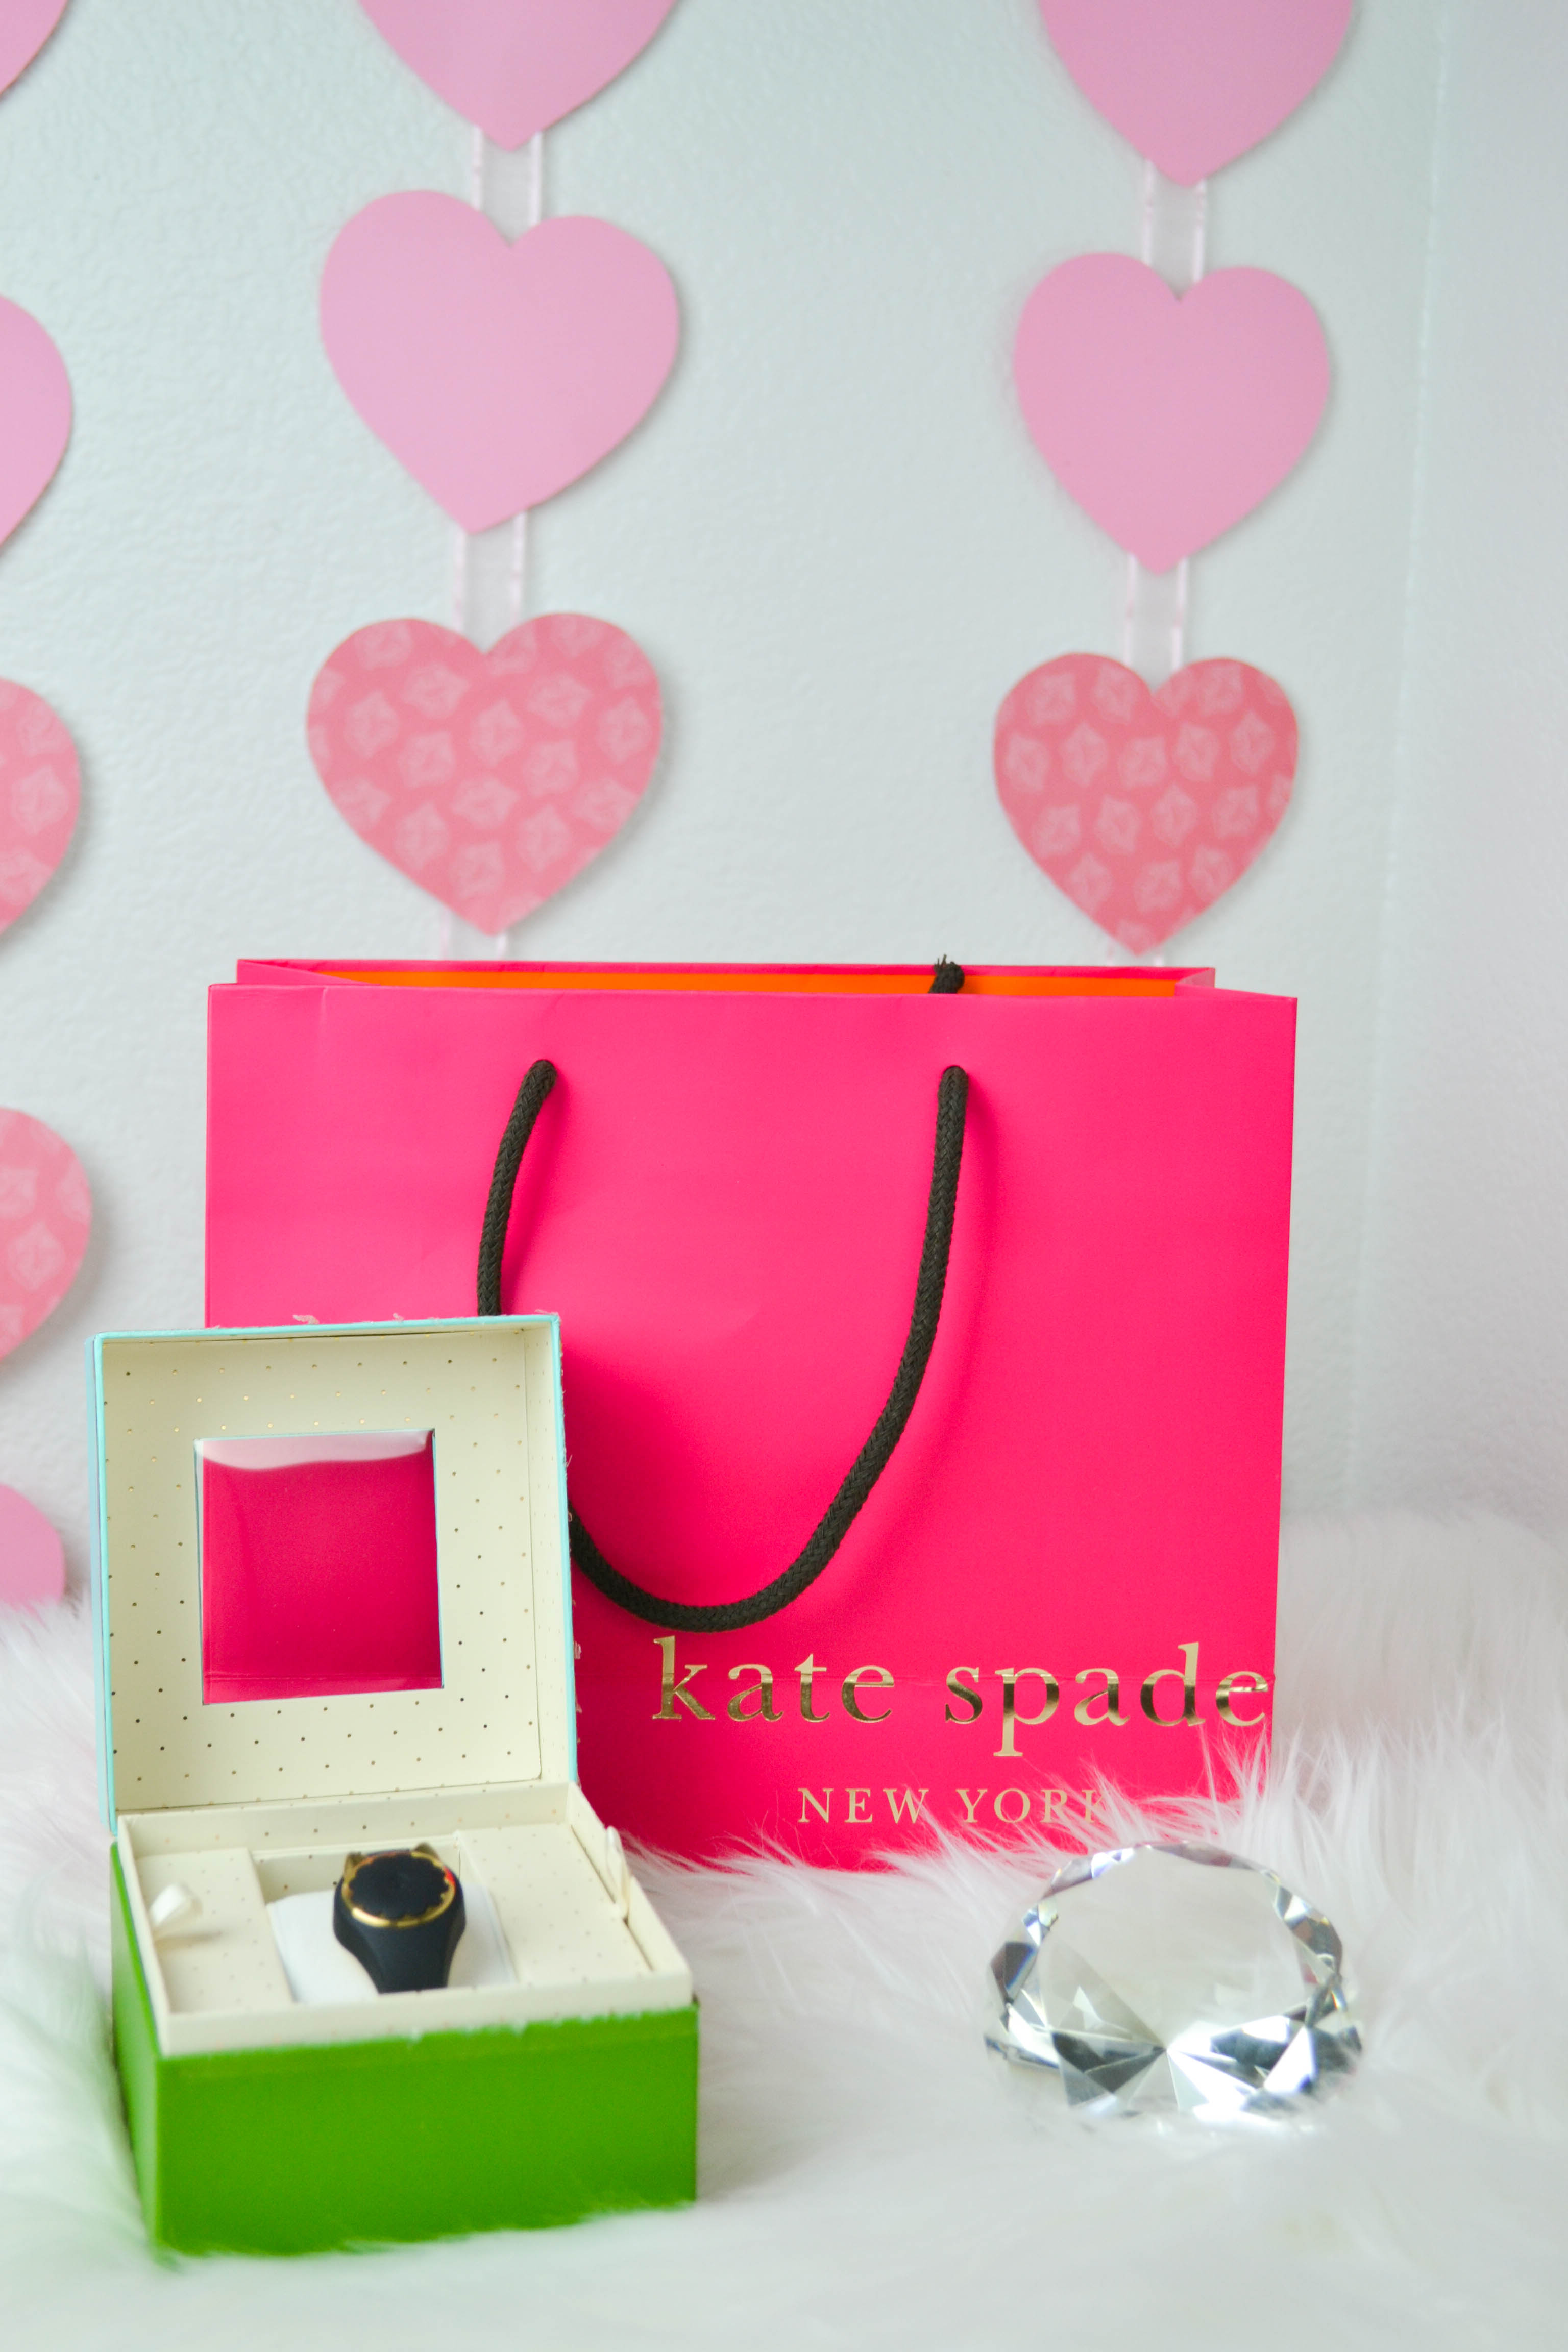 Kate Spade Tracker |What Girls Want for Valentine's Day| on Glam Life Living